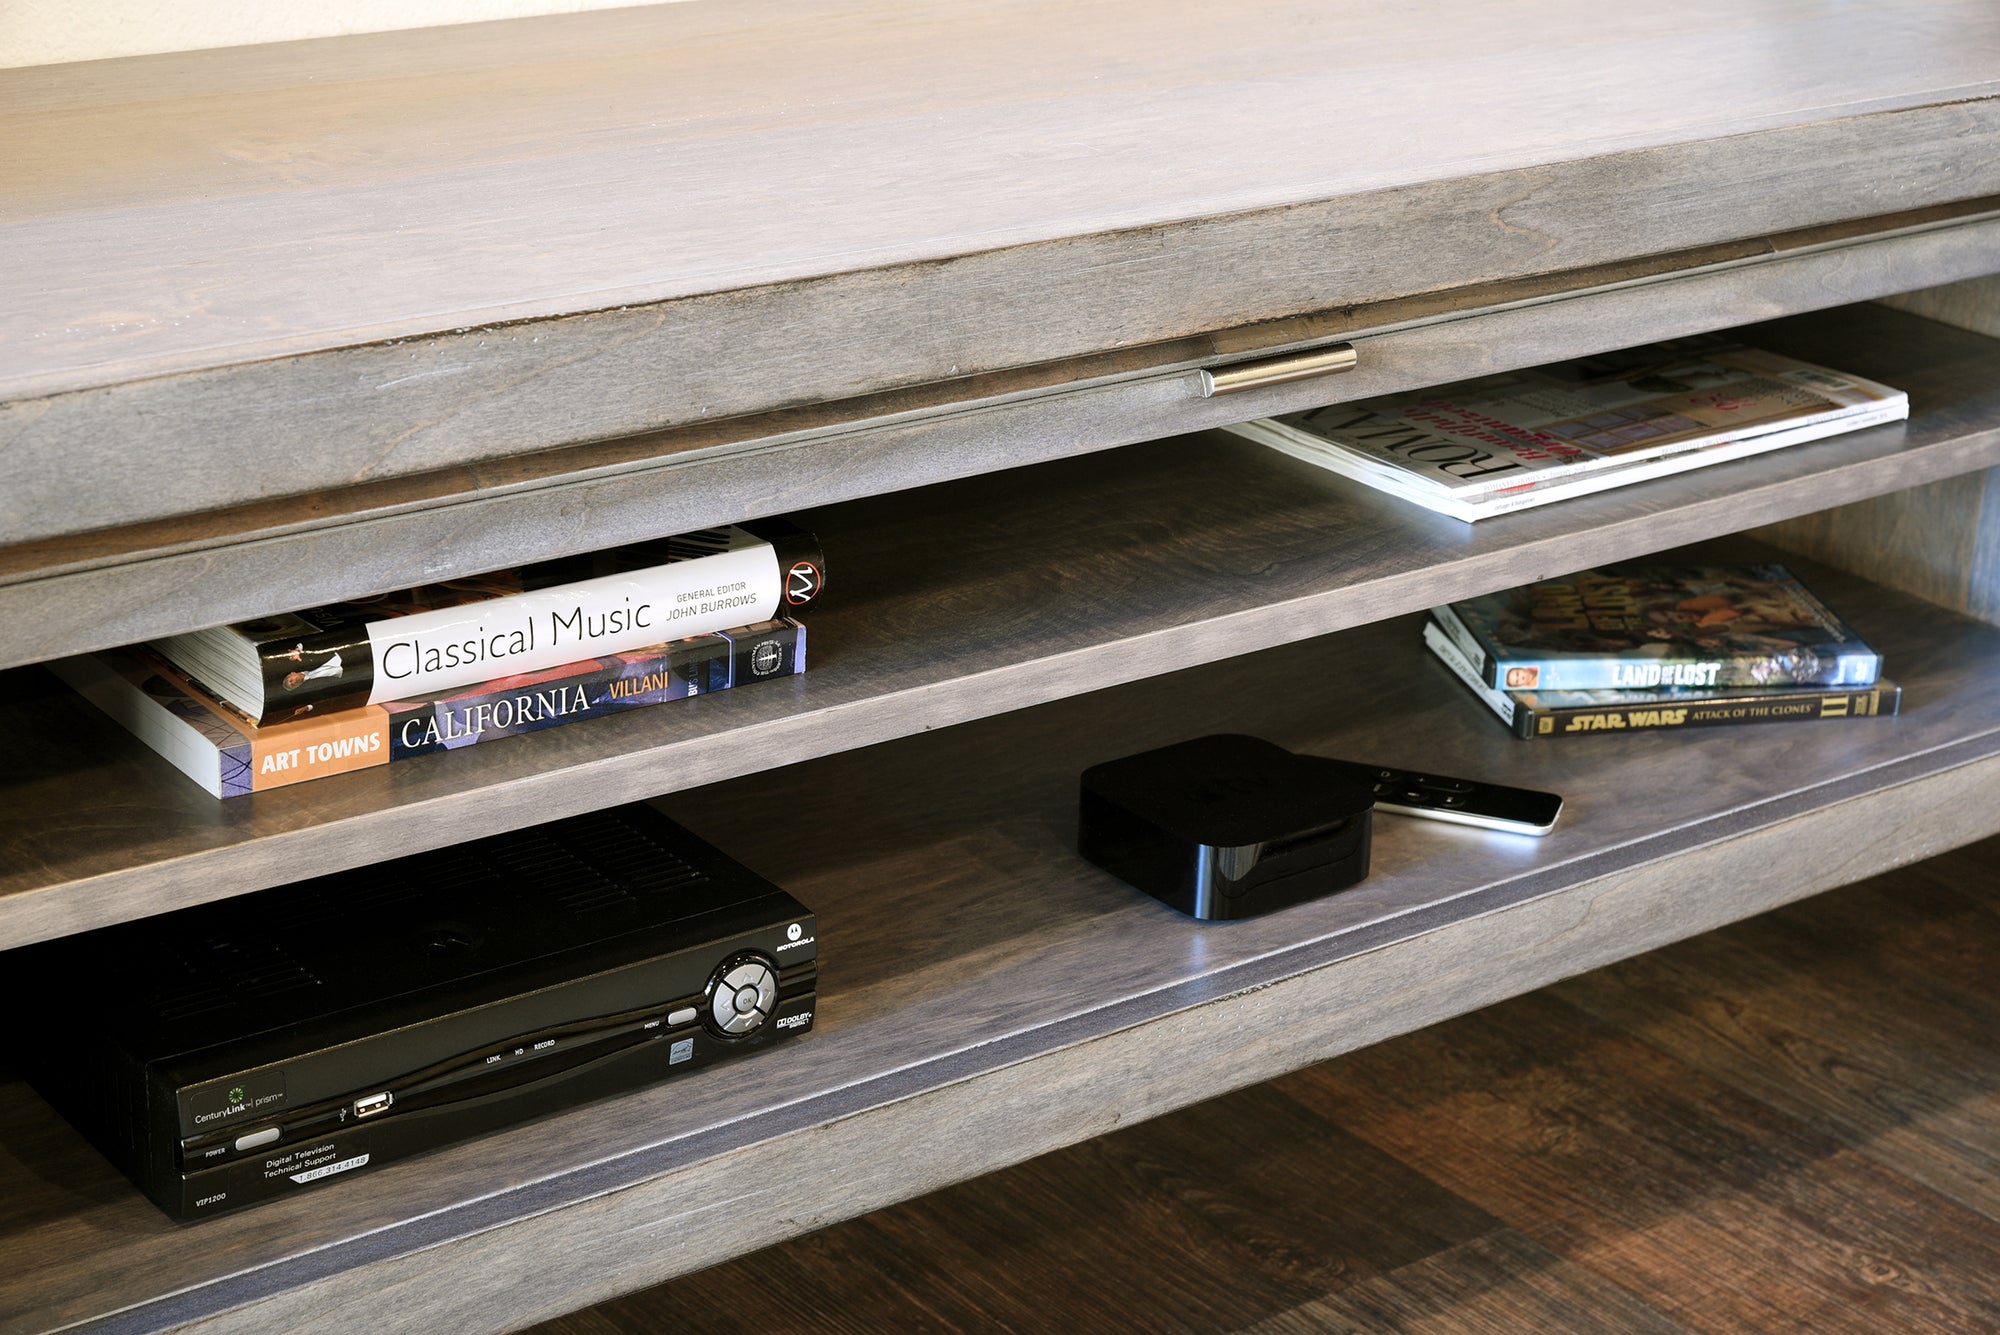 Floating TV Stand - Woodwaves - Floating Entertainment Center Coastal Modern - ECO GEO Collection - Lakewood Gray